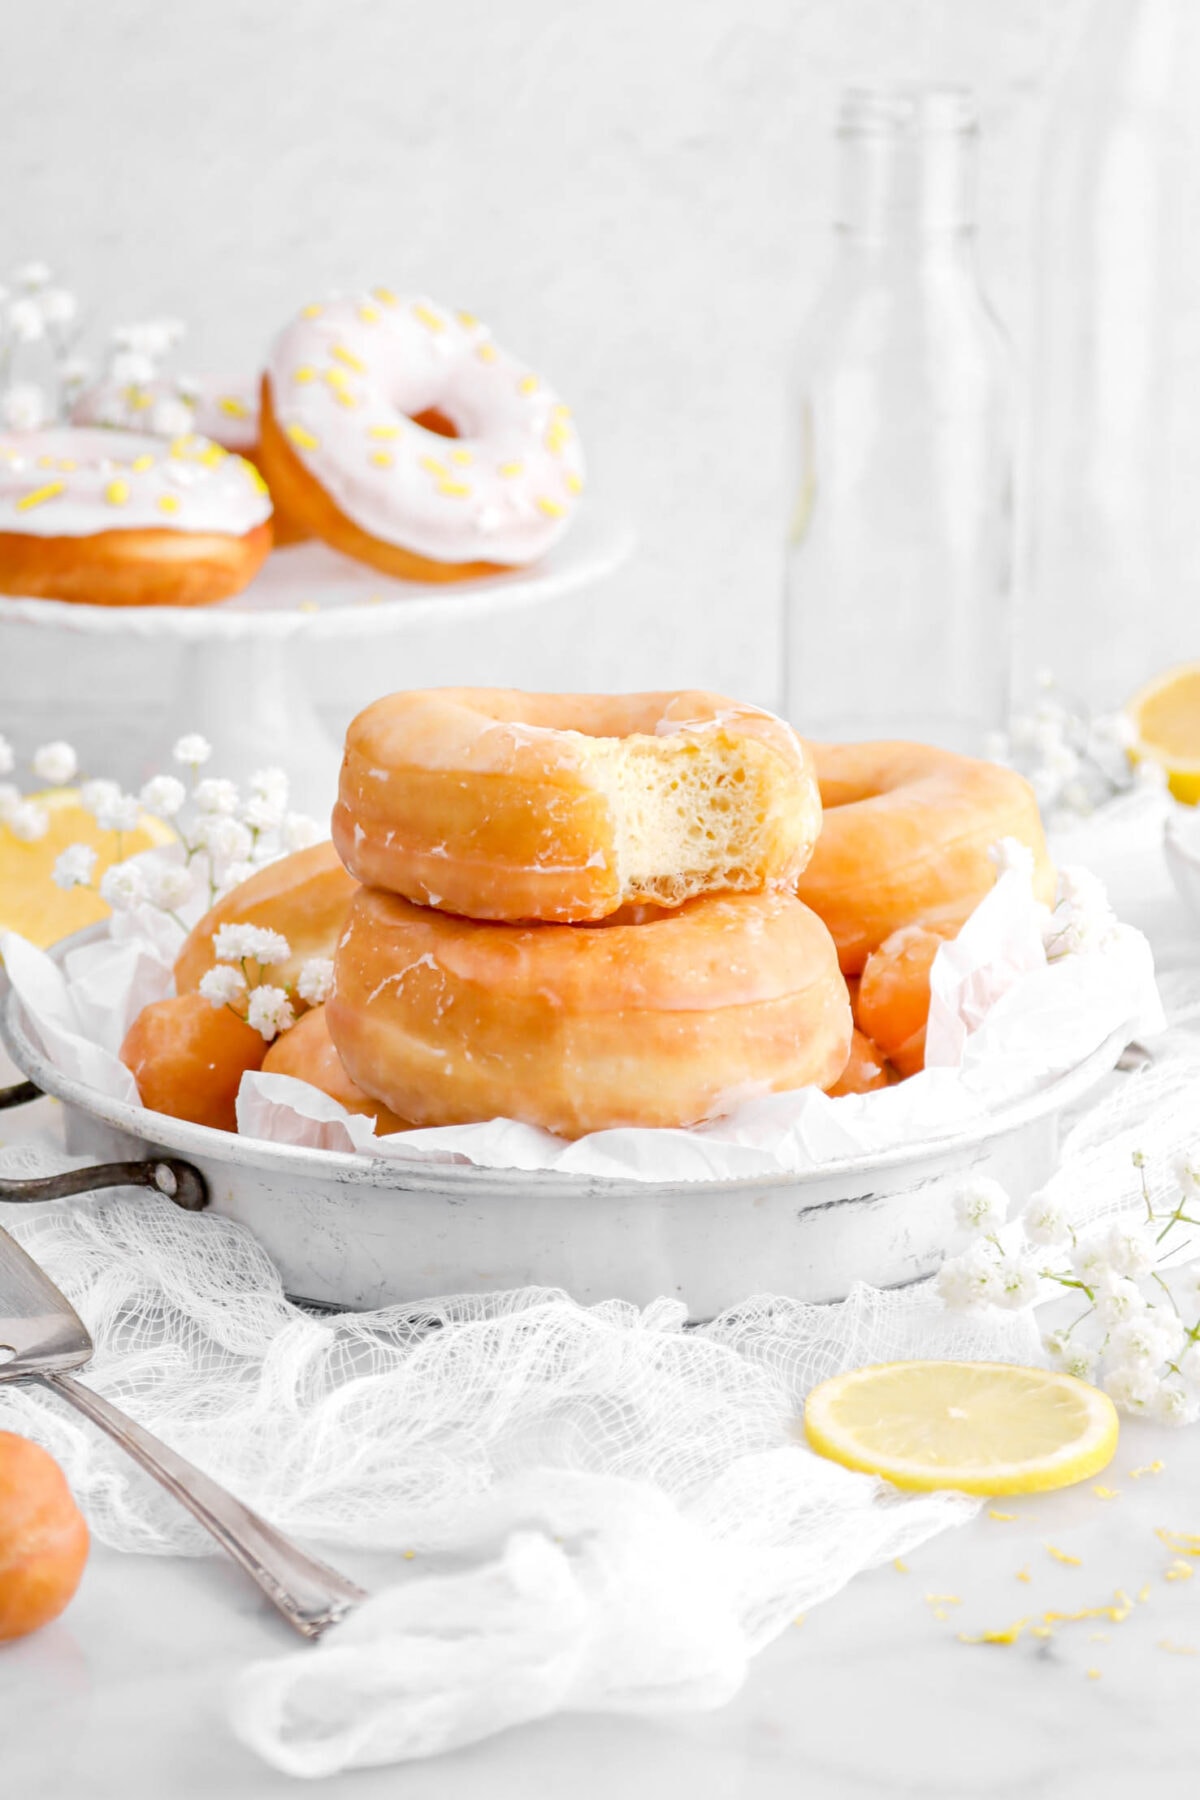 stacked lemon doughnuts in antique cake pan with top doughnut missing a bite, with white flowers and more doughnuts around.